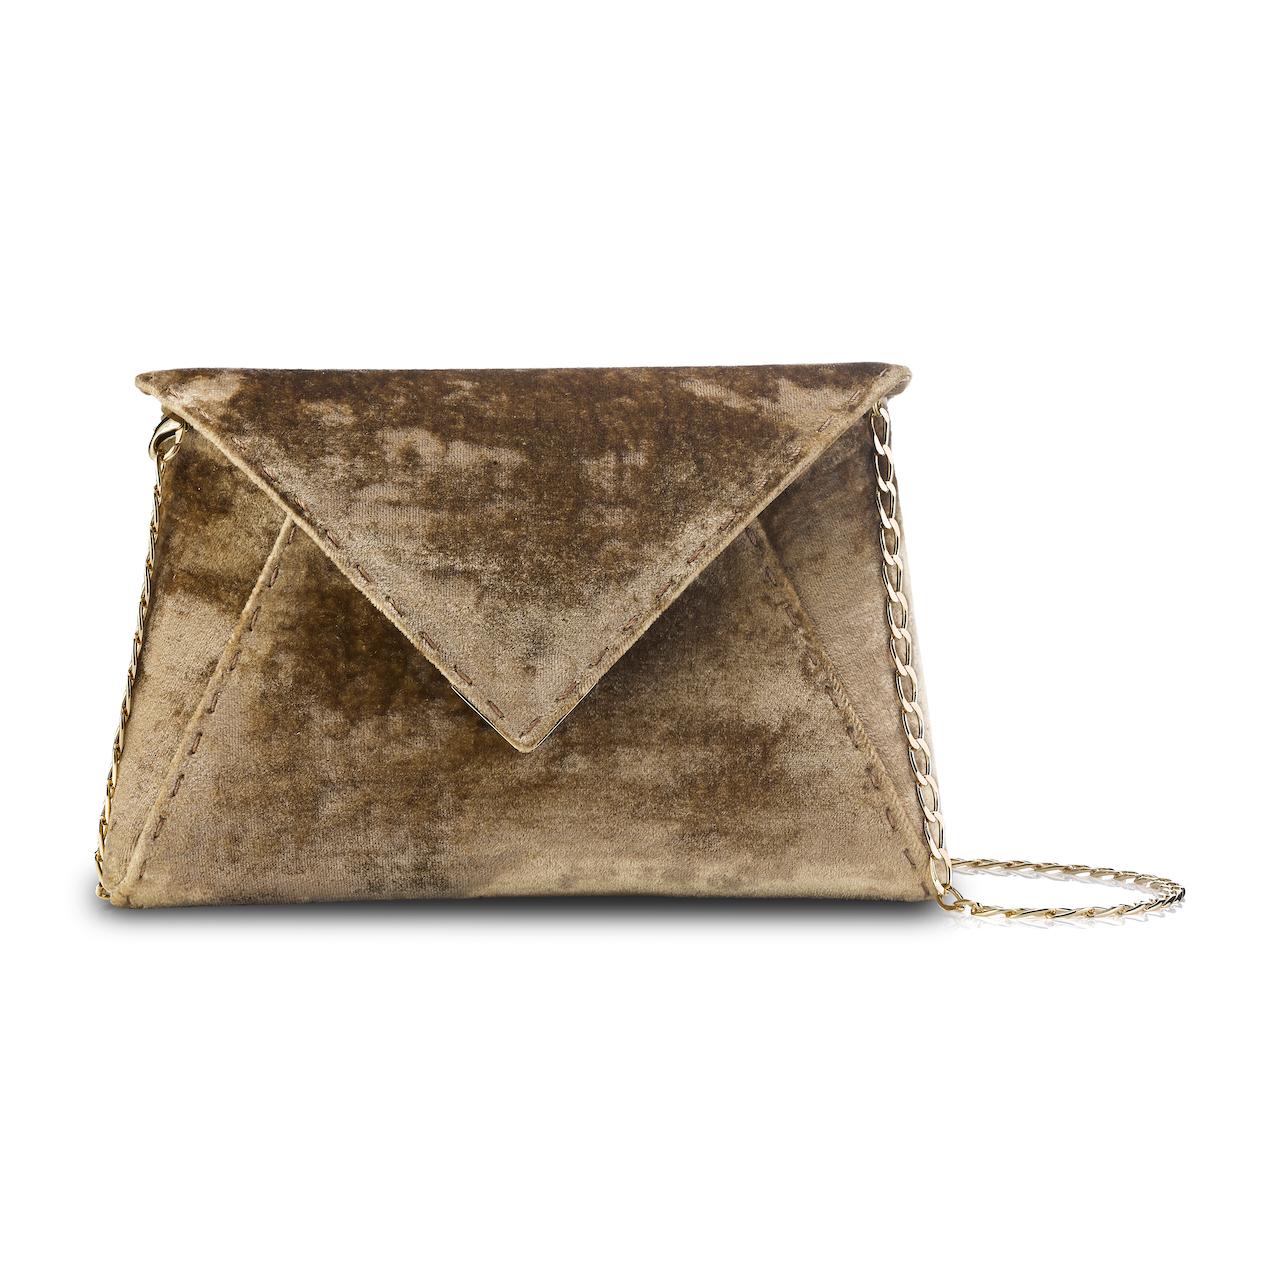 The Lee Pouchet Small is featured in our Antique Bronze crushed velvet with gold hardware. The envelope-shaped clutch is designed with a triangular front flap and a magnetic snap closure. The Lee fits the large iPhone, has a hidden exterior pocket,